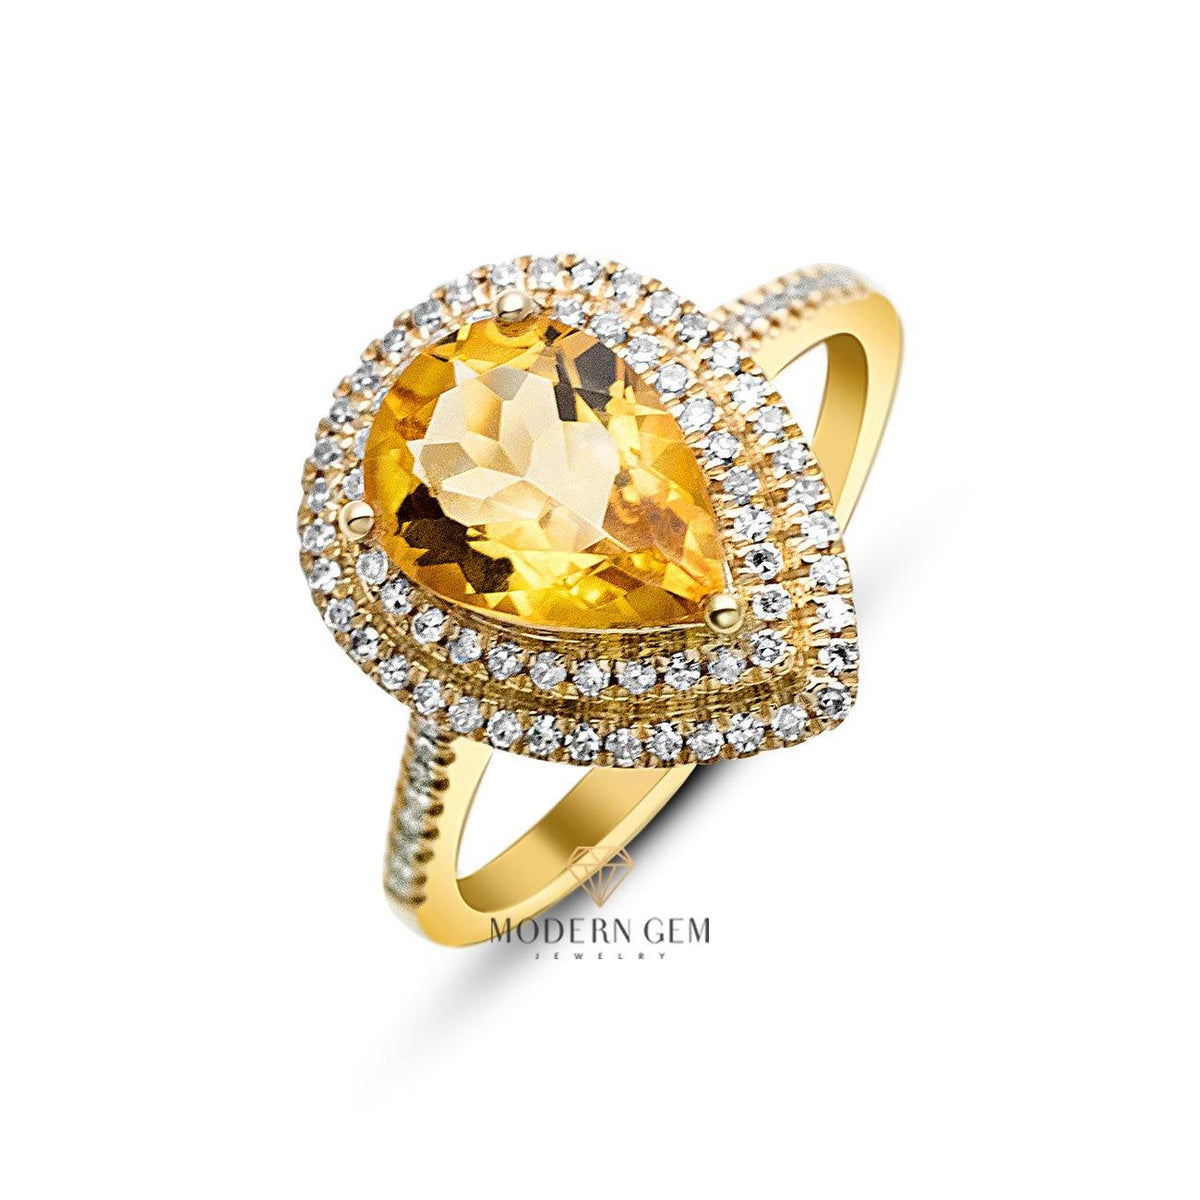 Citrine Ring in Pear Shape and Yellow Gold | Custom Engagement Ring | Modern Gem Jewelry | Saratti